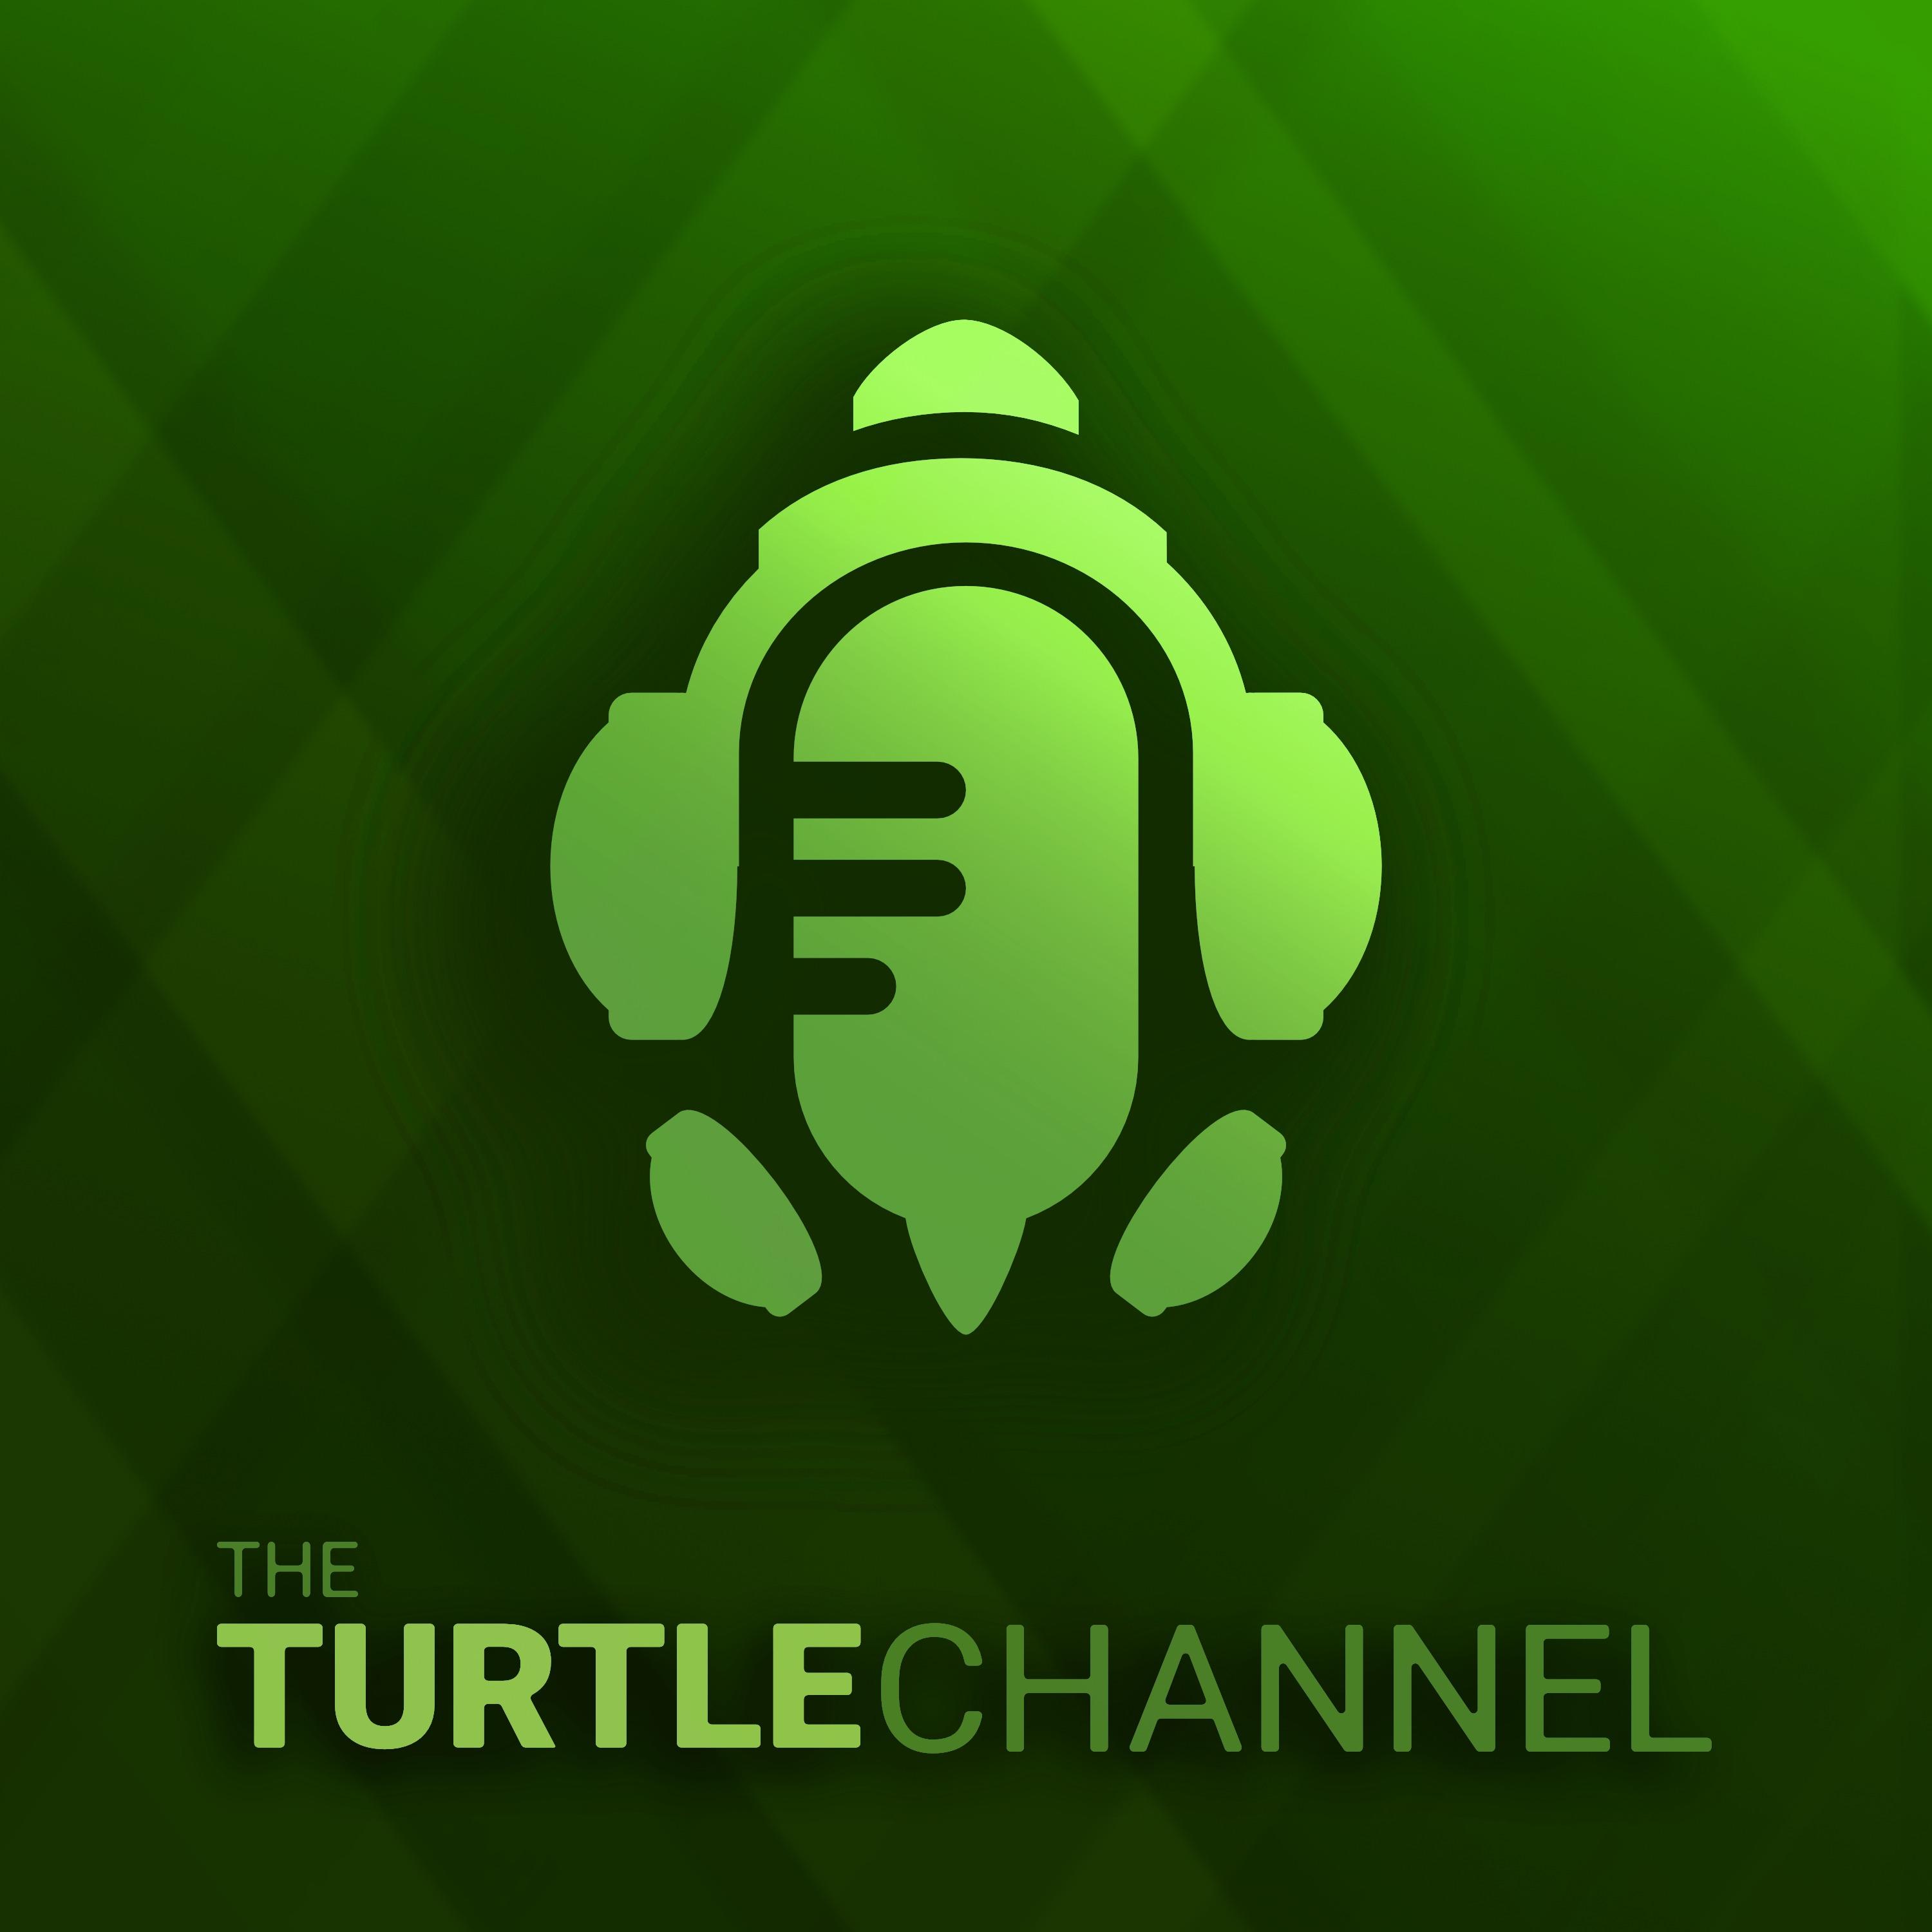 The Turtle Channel